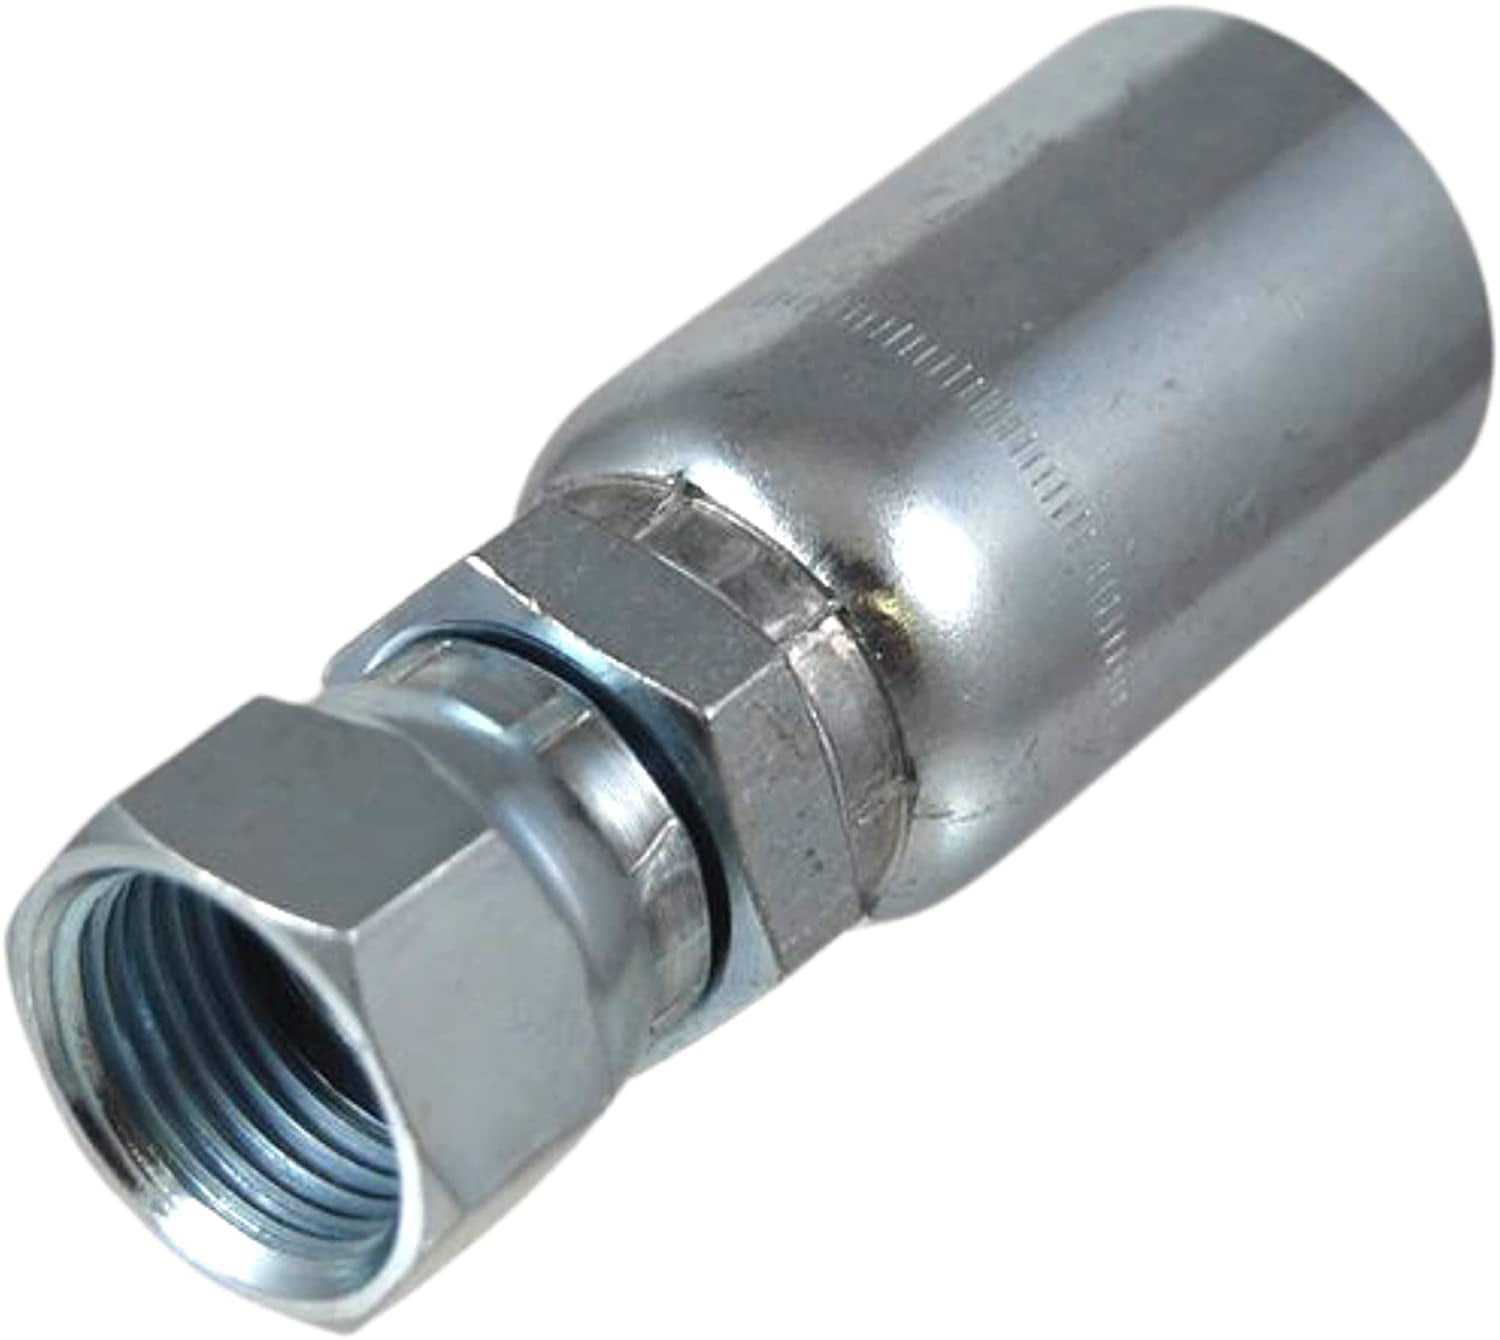 1/4" x 12 "  Hydraulic Hose Assembly w/FEMALE JIC ends FREE SHIPPING 